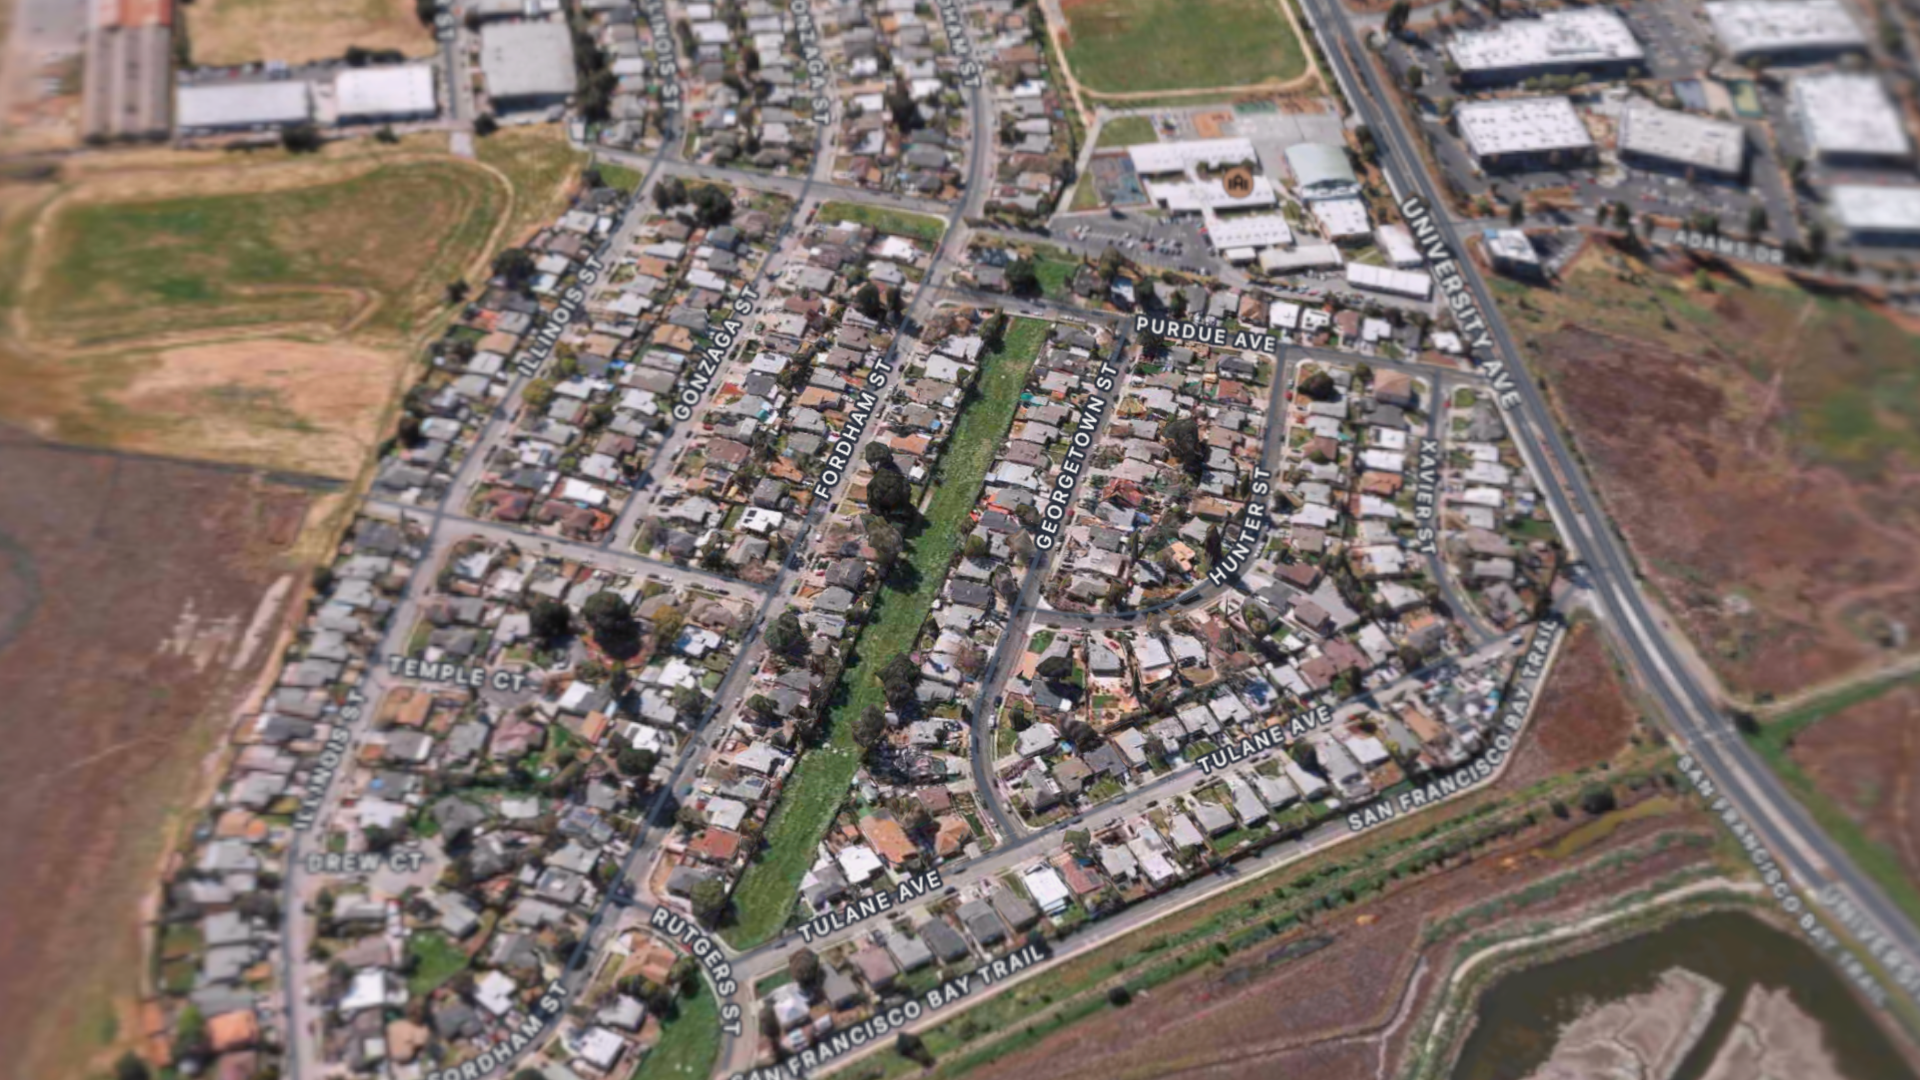 Notice the long green strip of SFPUC-owned land in the northern University Village neighborhood of East Palo Alto, CA. This photo is from Apple Maps 3D view, 